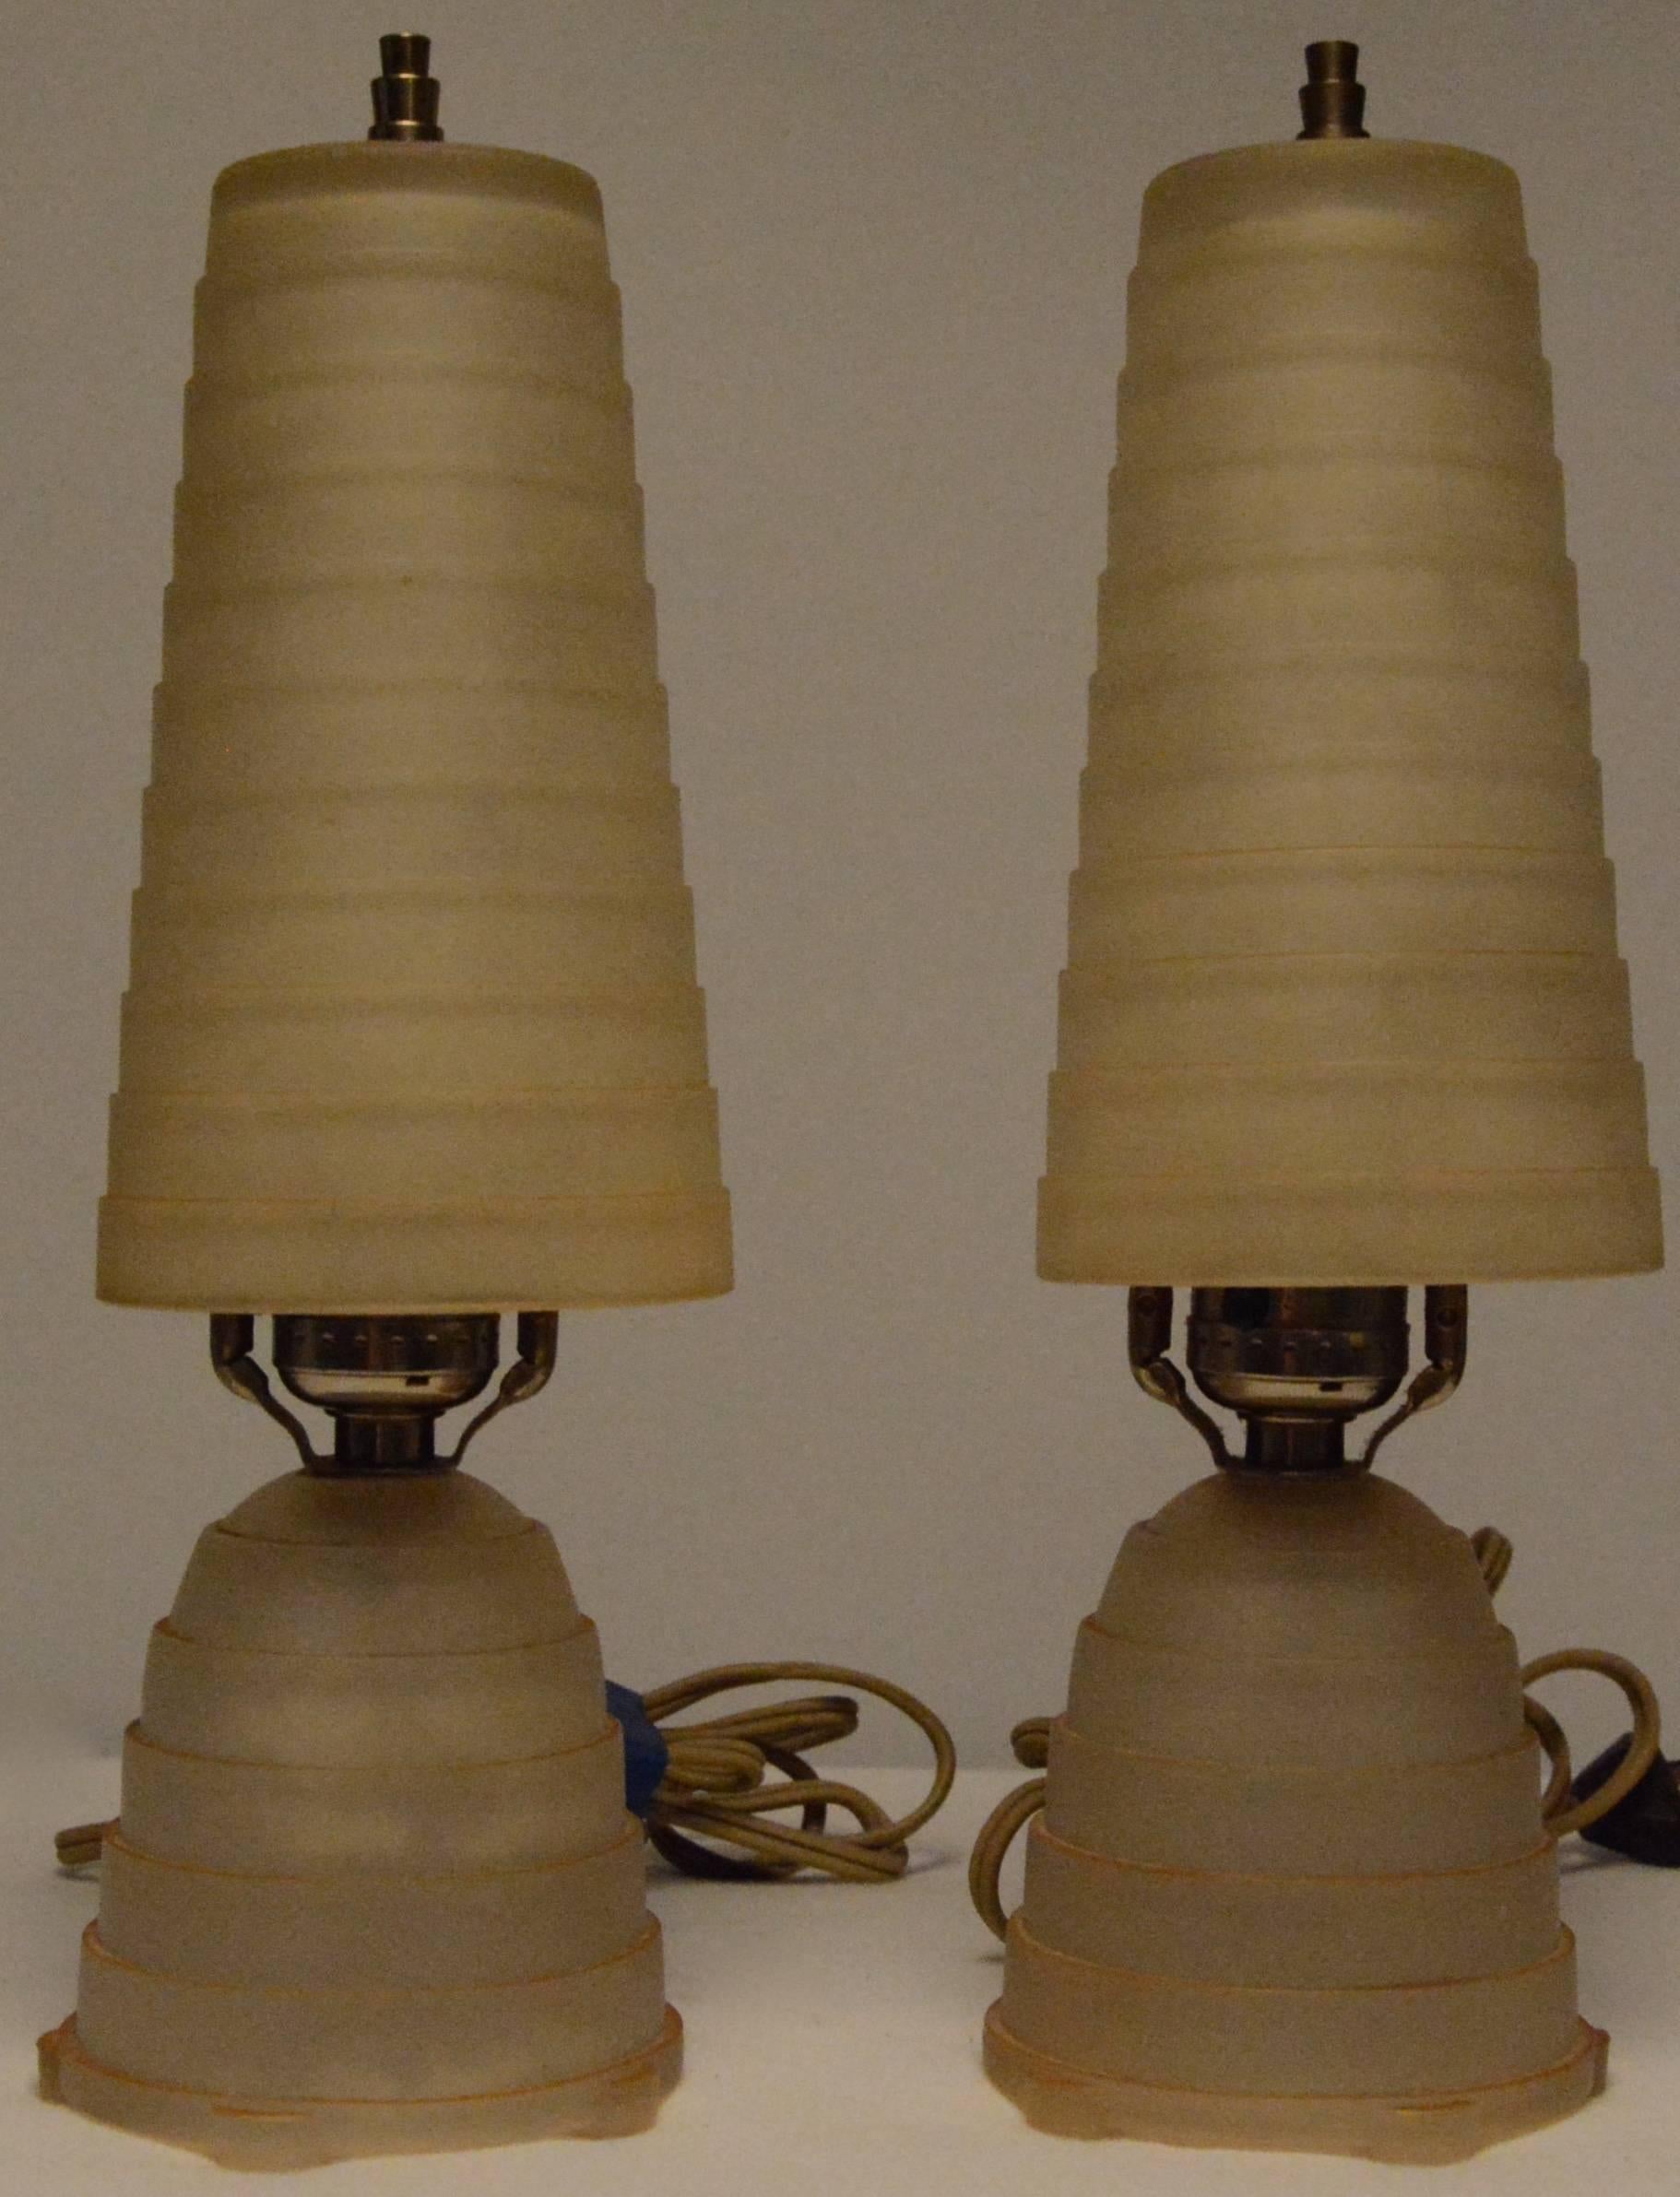 This is a nice pair of vintage Art Deco vanity lamps. They have soft gold frosted with stepped glass shades and matching base. Each lamp retains its original finial and takes a tubular bulb. The cords will need to be replaced as there is bare wire